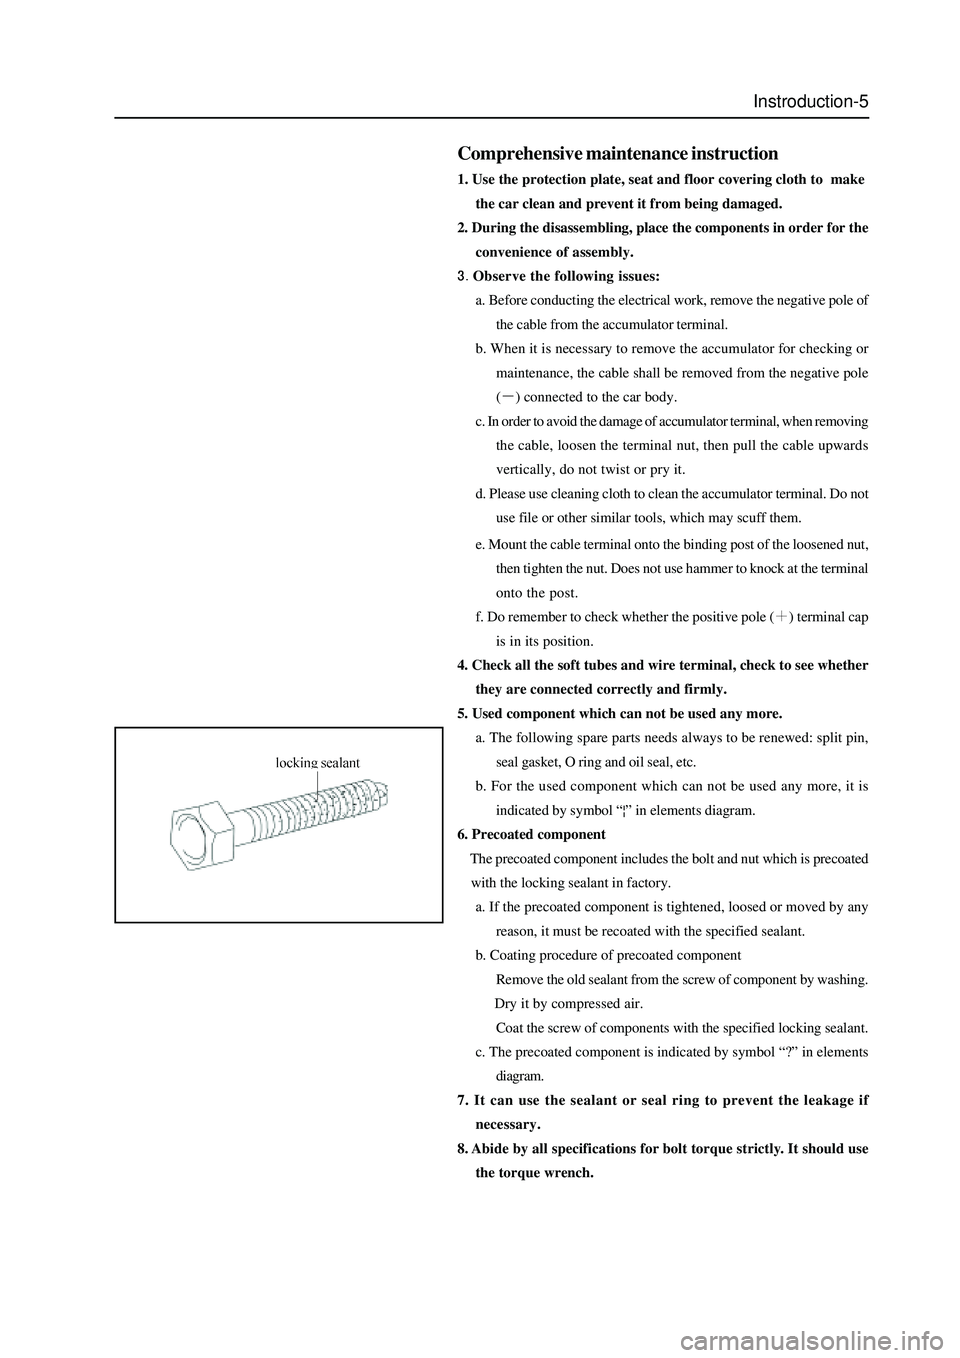 GREAT WALL HOVER 2006  Service Repair Manual Instroduction-5
e. Mount the cable terminal onto the binding post of the loosened nut,
then tighten the nut. Does not use hammer to knock at the terminal
onto the post.
f. Do remember to check whether